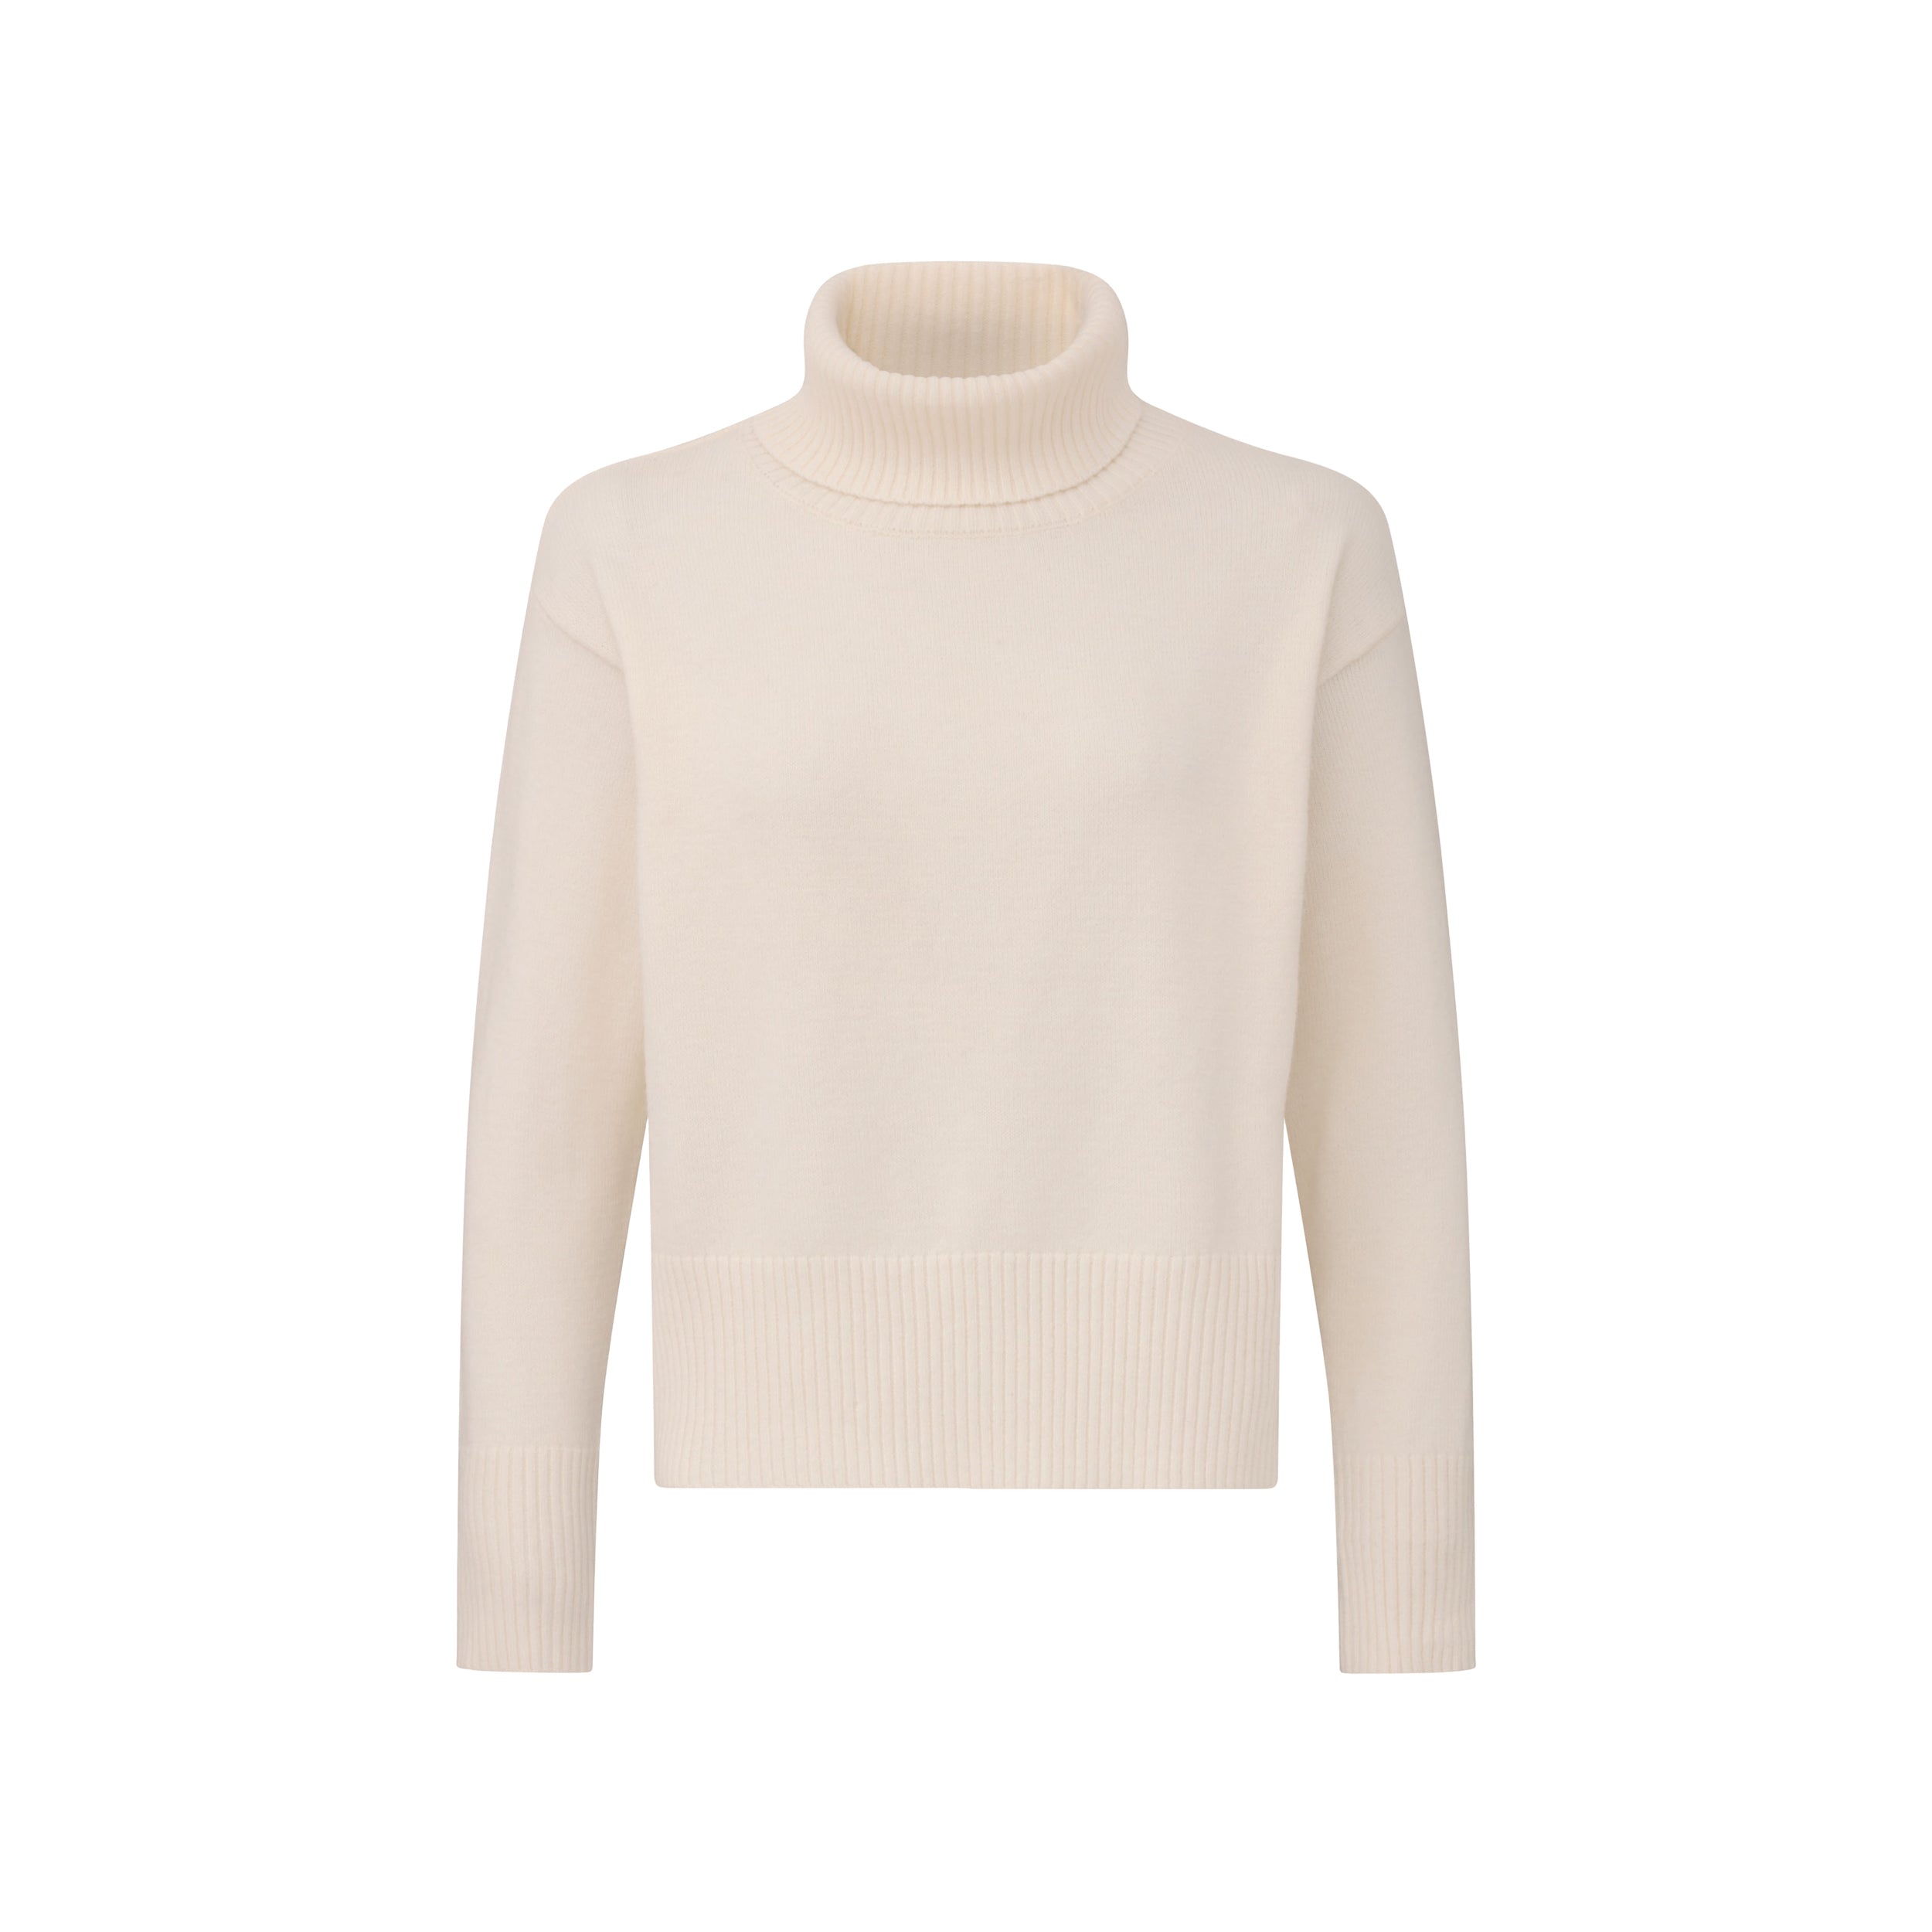 Front product shot of pearl colored oversized sweater